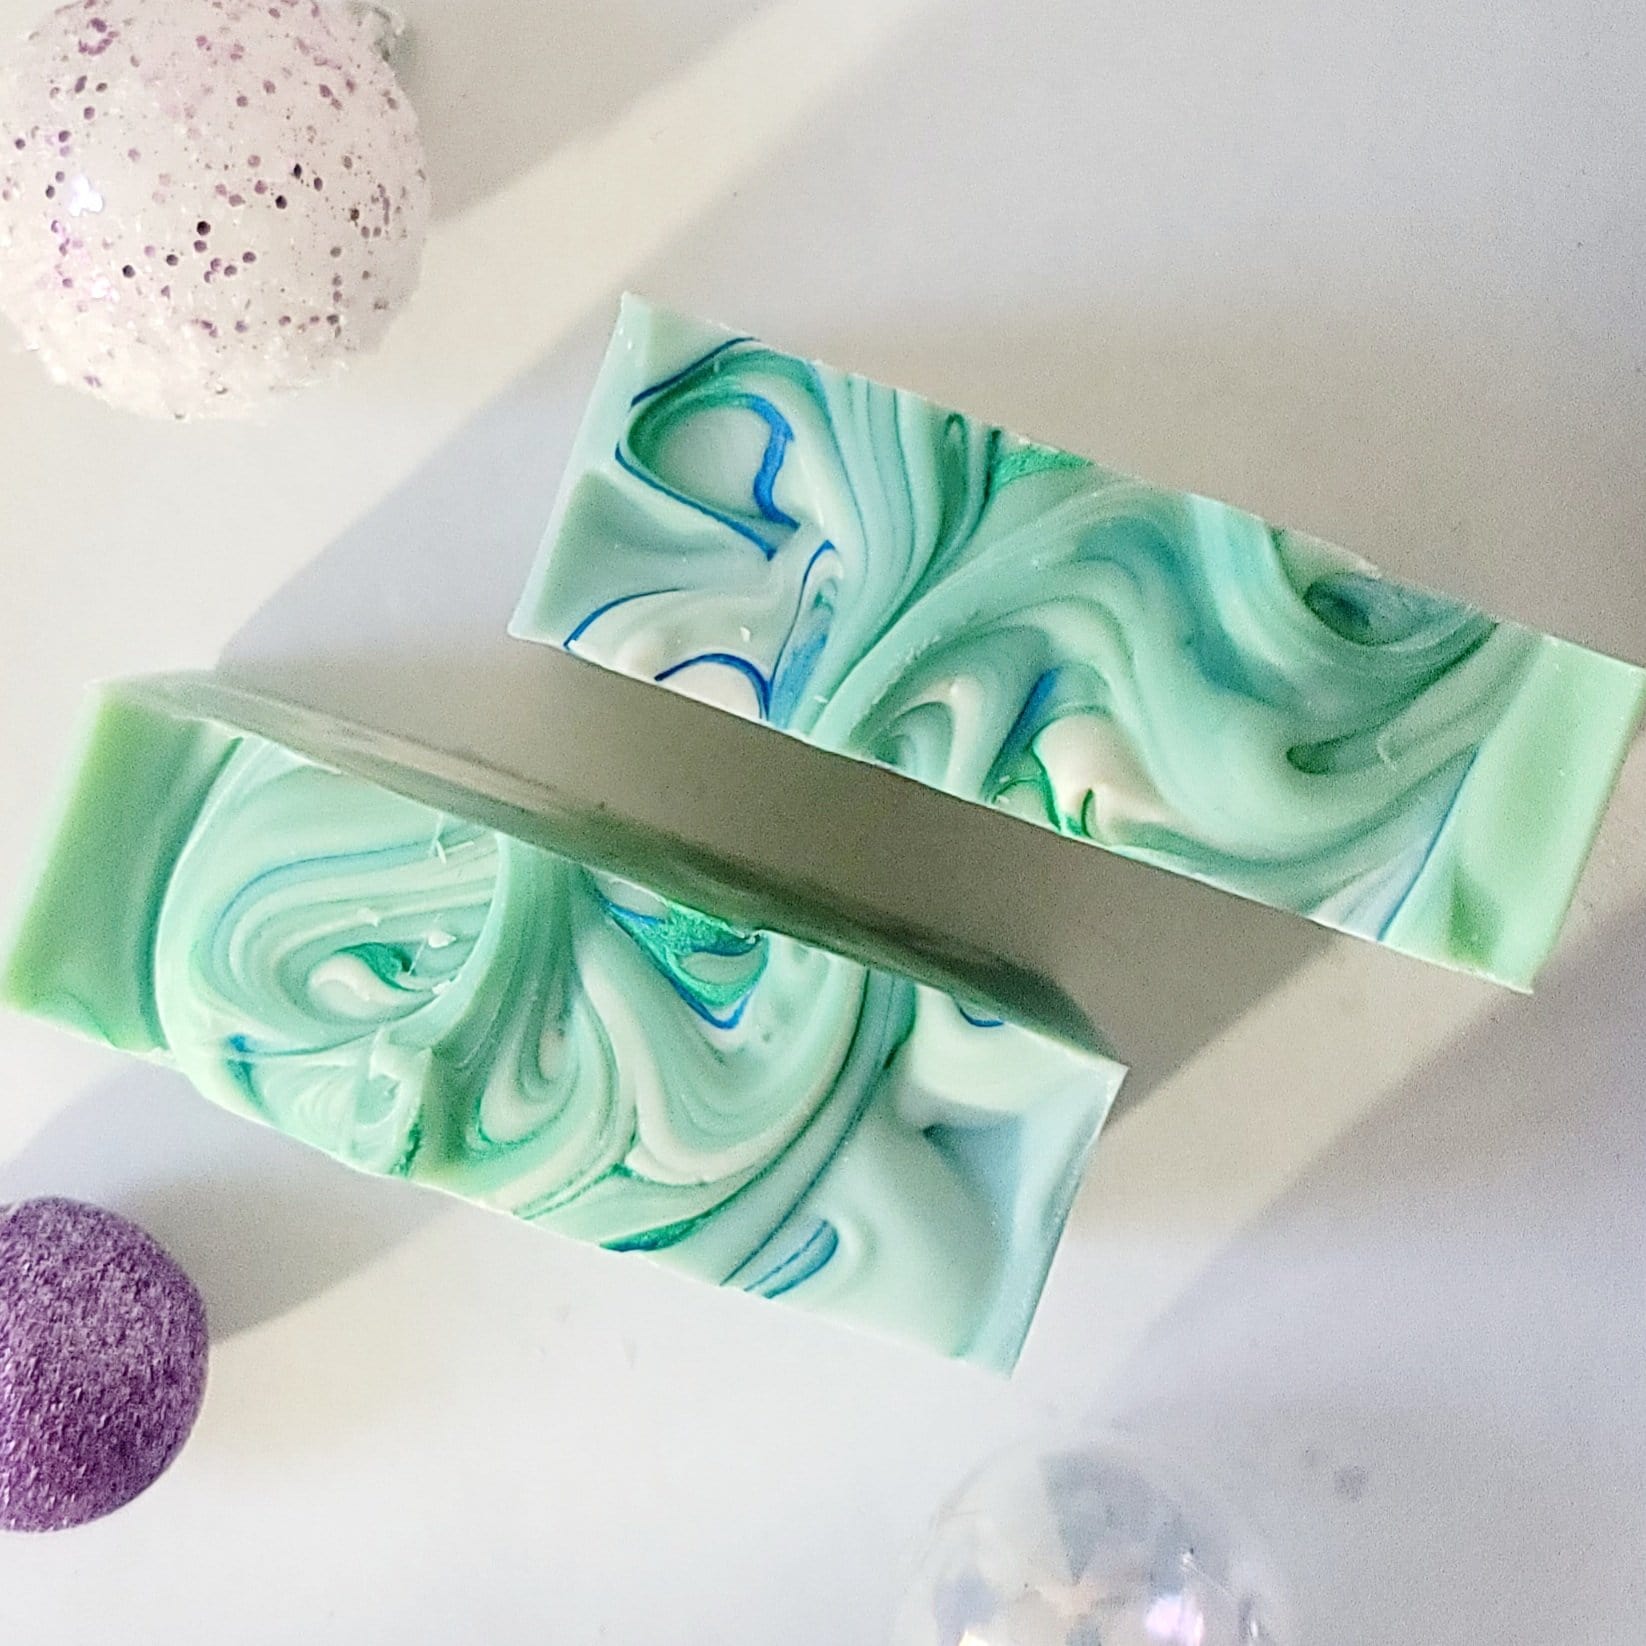 Eucalyptus & Spearmint Soap Bar - Diana's Candles and Soaps 